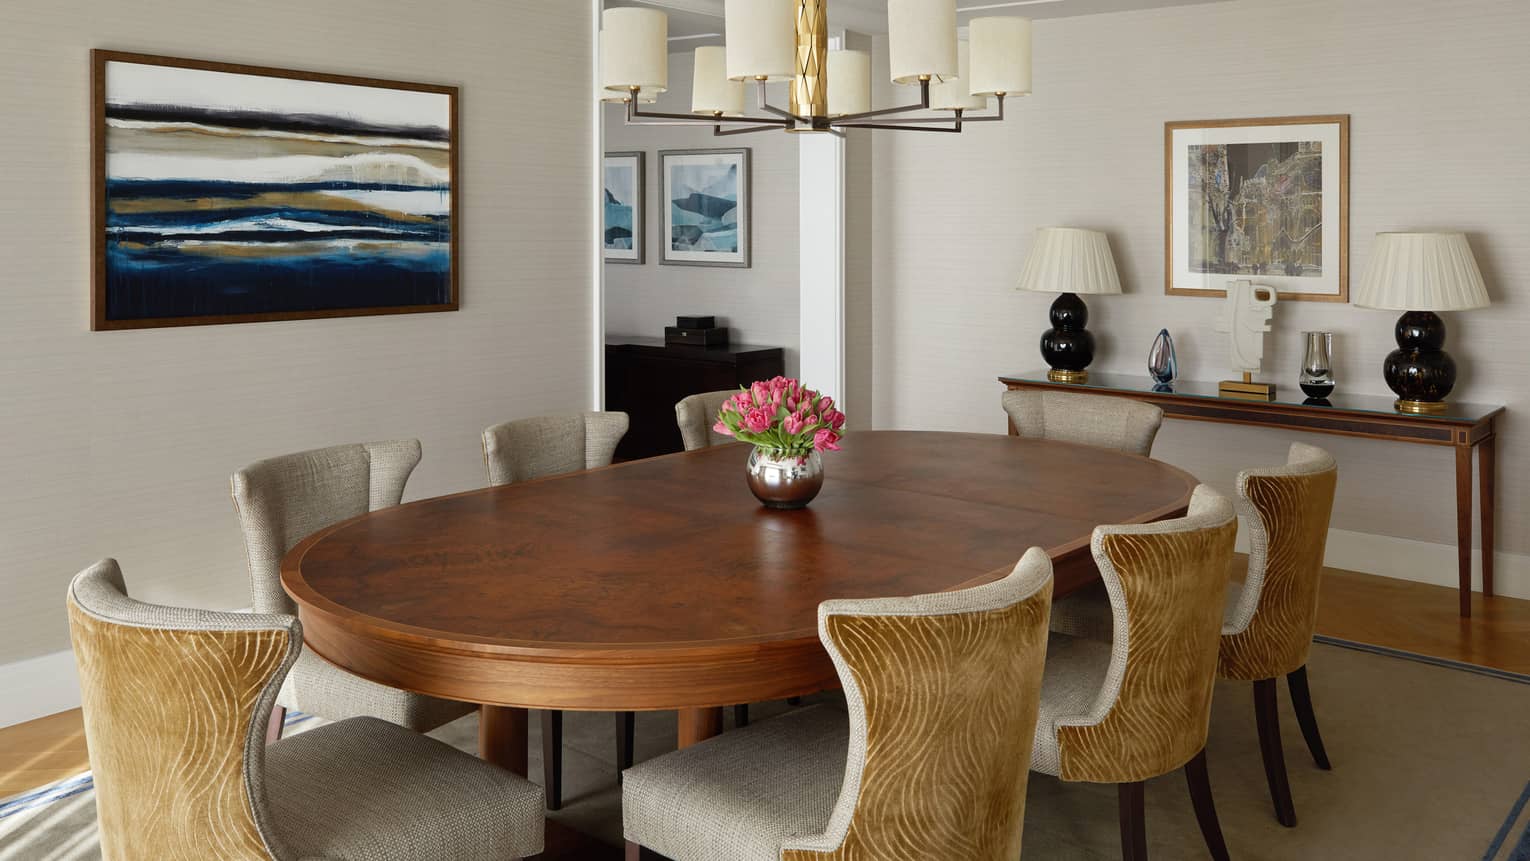 A dining area with large wood table, hanging light, art on the walls and a shelf.